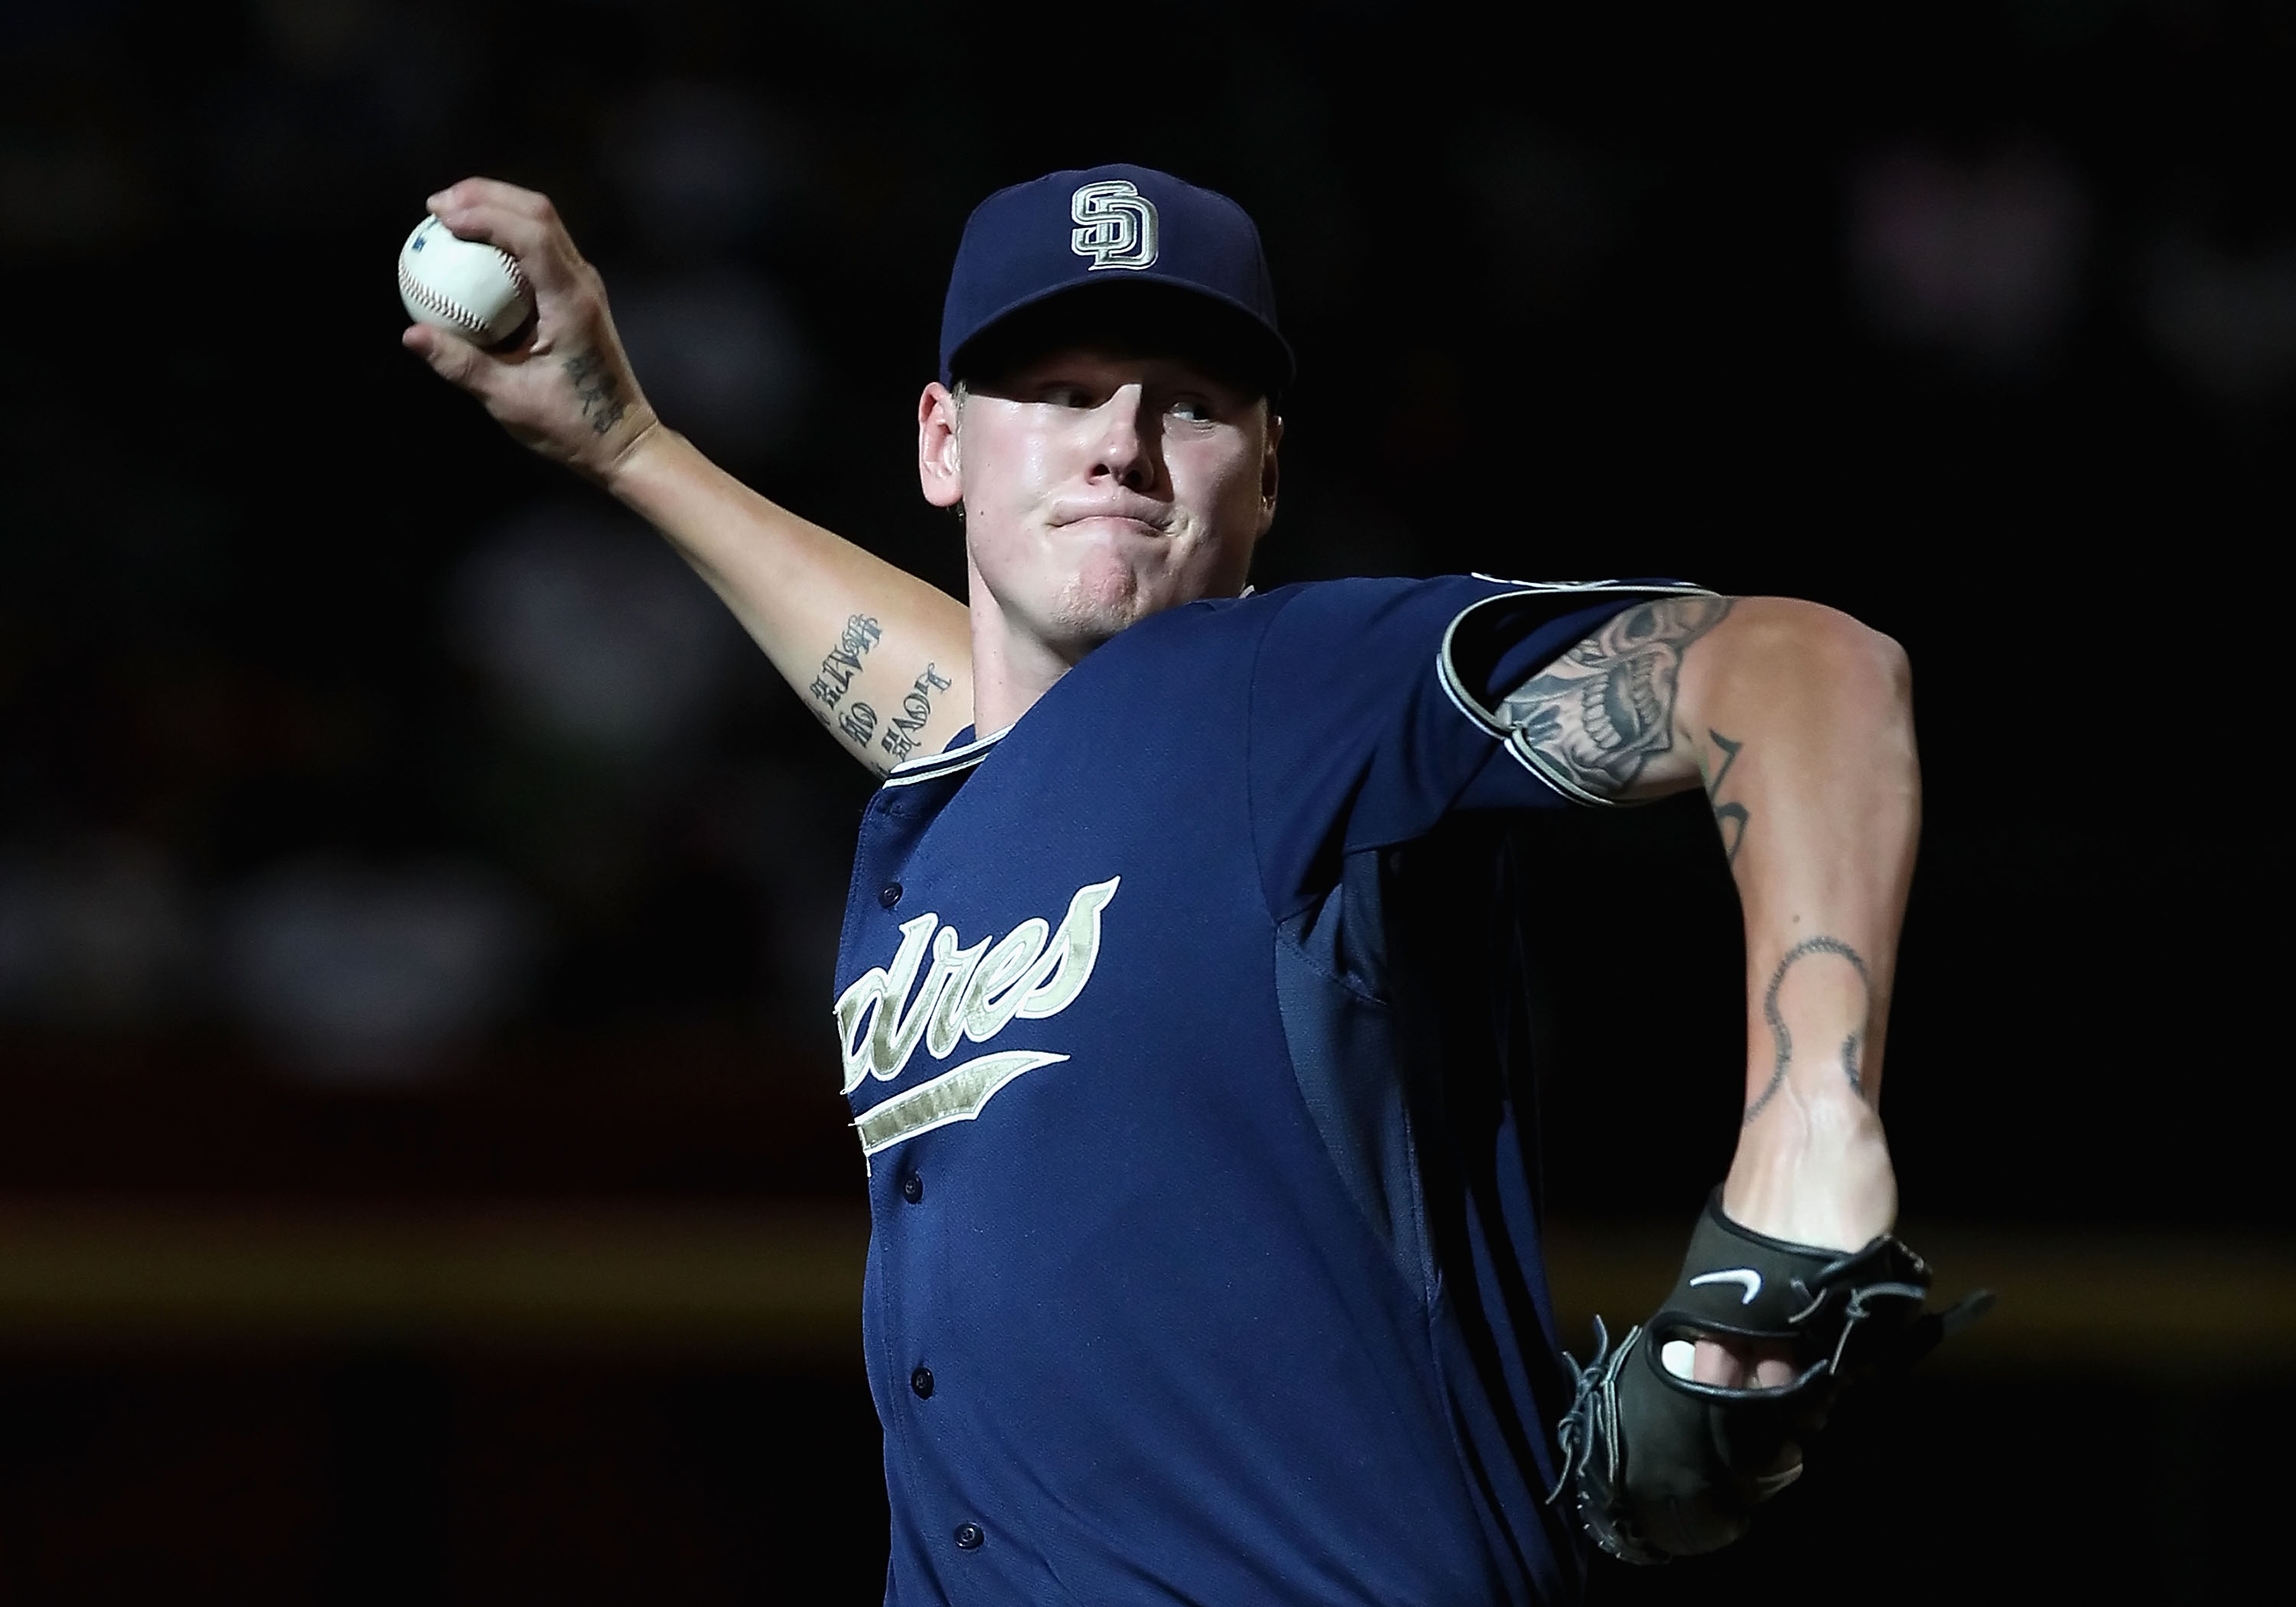 PHOENIX - SEPTEMBER 01:  Starting pitcher Mat Latos #38 of the San Diego Padres pitches against the Arizona Diamondbacks during the Major League Baseball game at Chase Field on September 1, 2010 in Phoenix, Arizona. The Diamondbacks defeated the Padres 5-